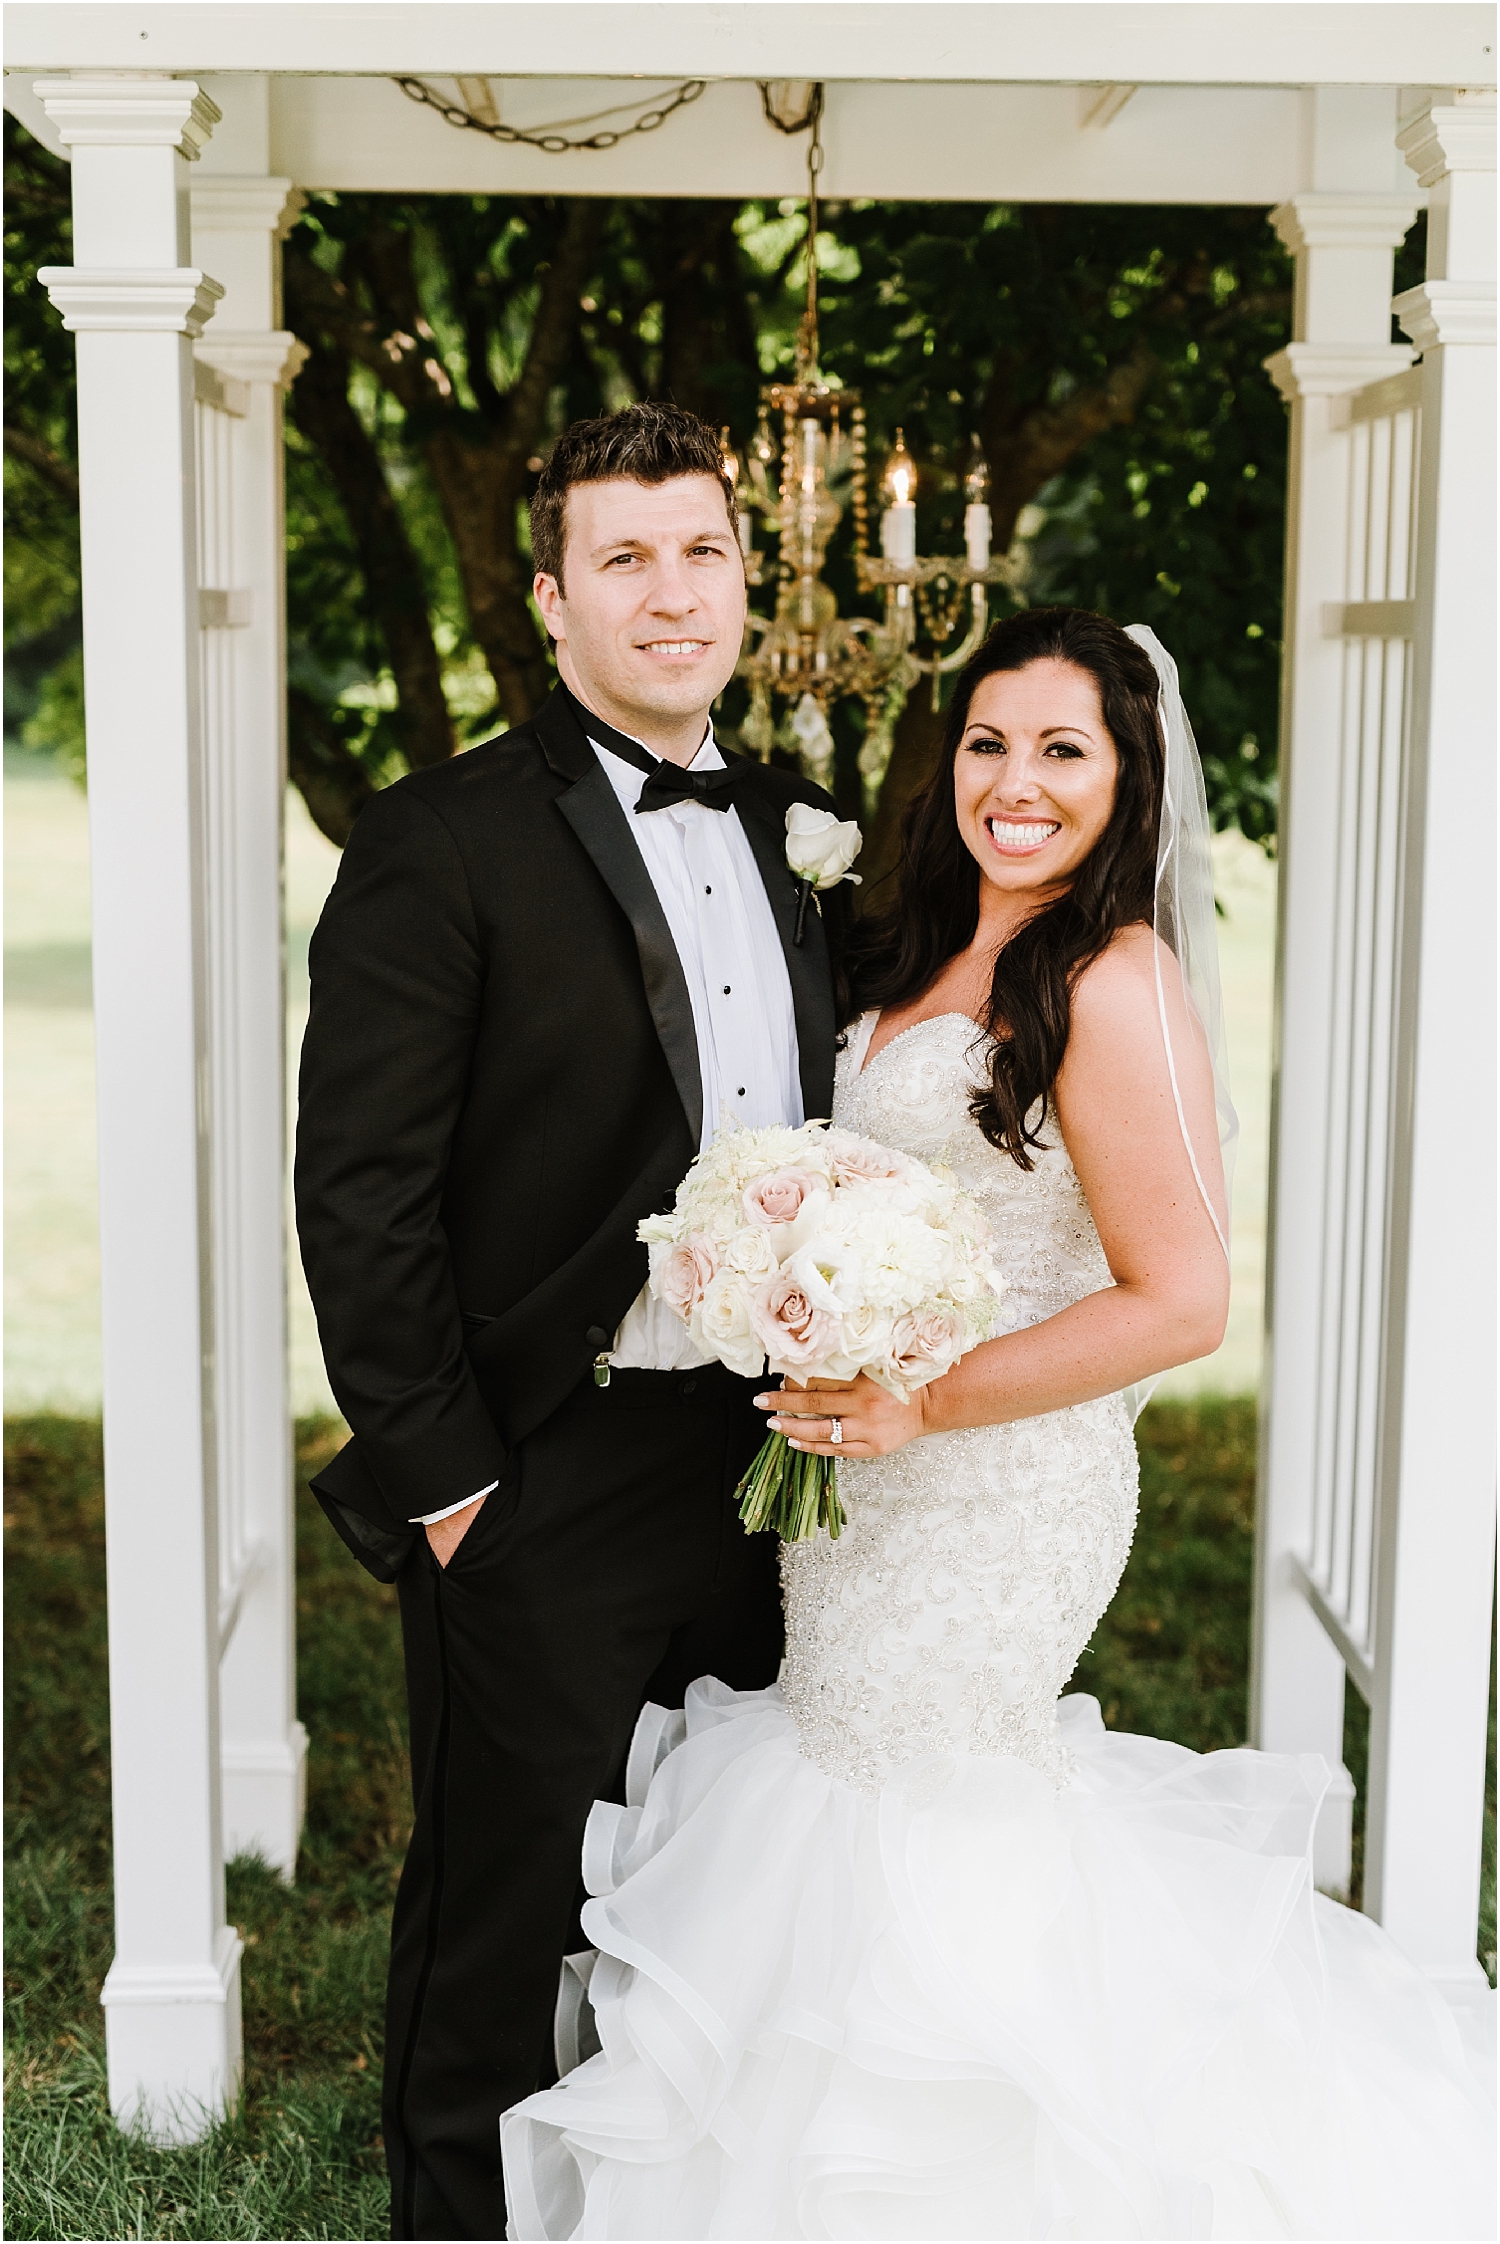 Blush Pink & Gold Summer Wedding at The Hellenic Center in Ipswich, MA by Boston Wedding Photographer Annmarie Swift